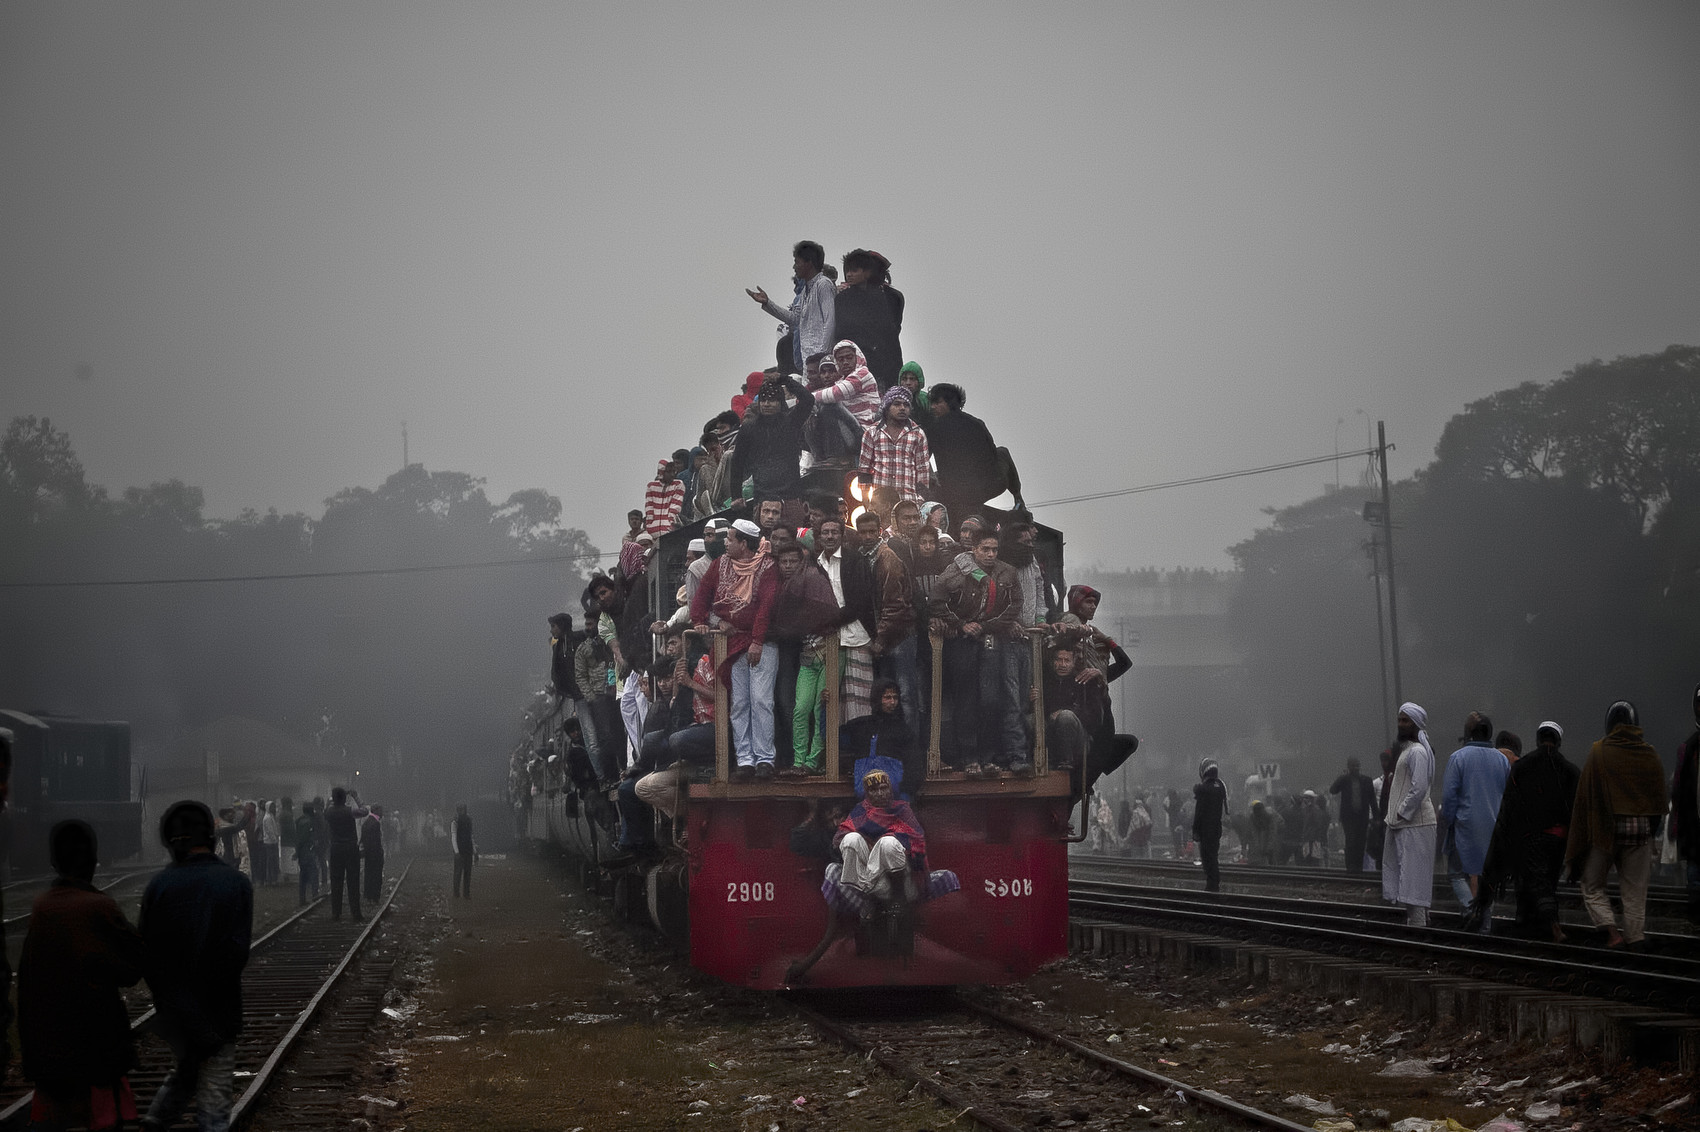 Muslim devotees arrive to Tongi on the last day of the annual Bishwa Ijtema in Tongi, Bangladesh. The Bishwa Ijtema is the second largest gathering of Muslims in the world, after the Hajj, and is organized by World Tablig Council, which preaches teachings of Islam and prophet Mohammad. (Photo by Allison Joyce/Getty Images)